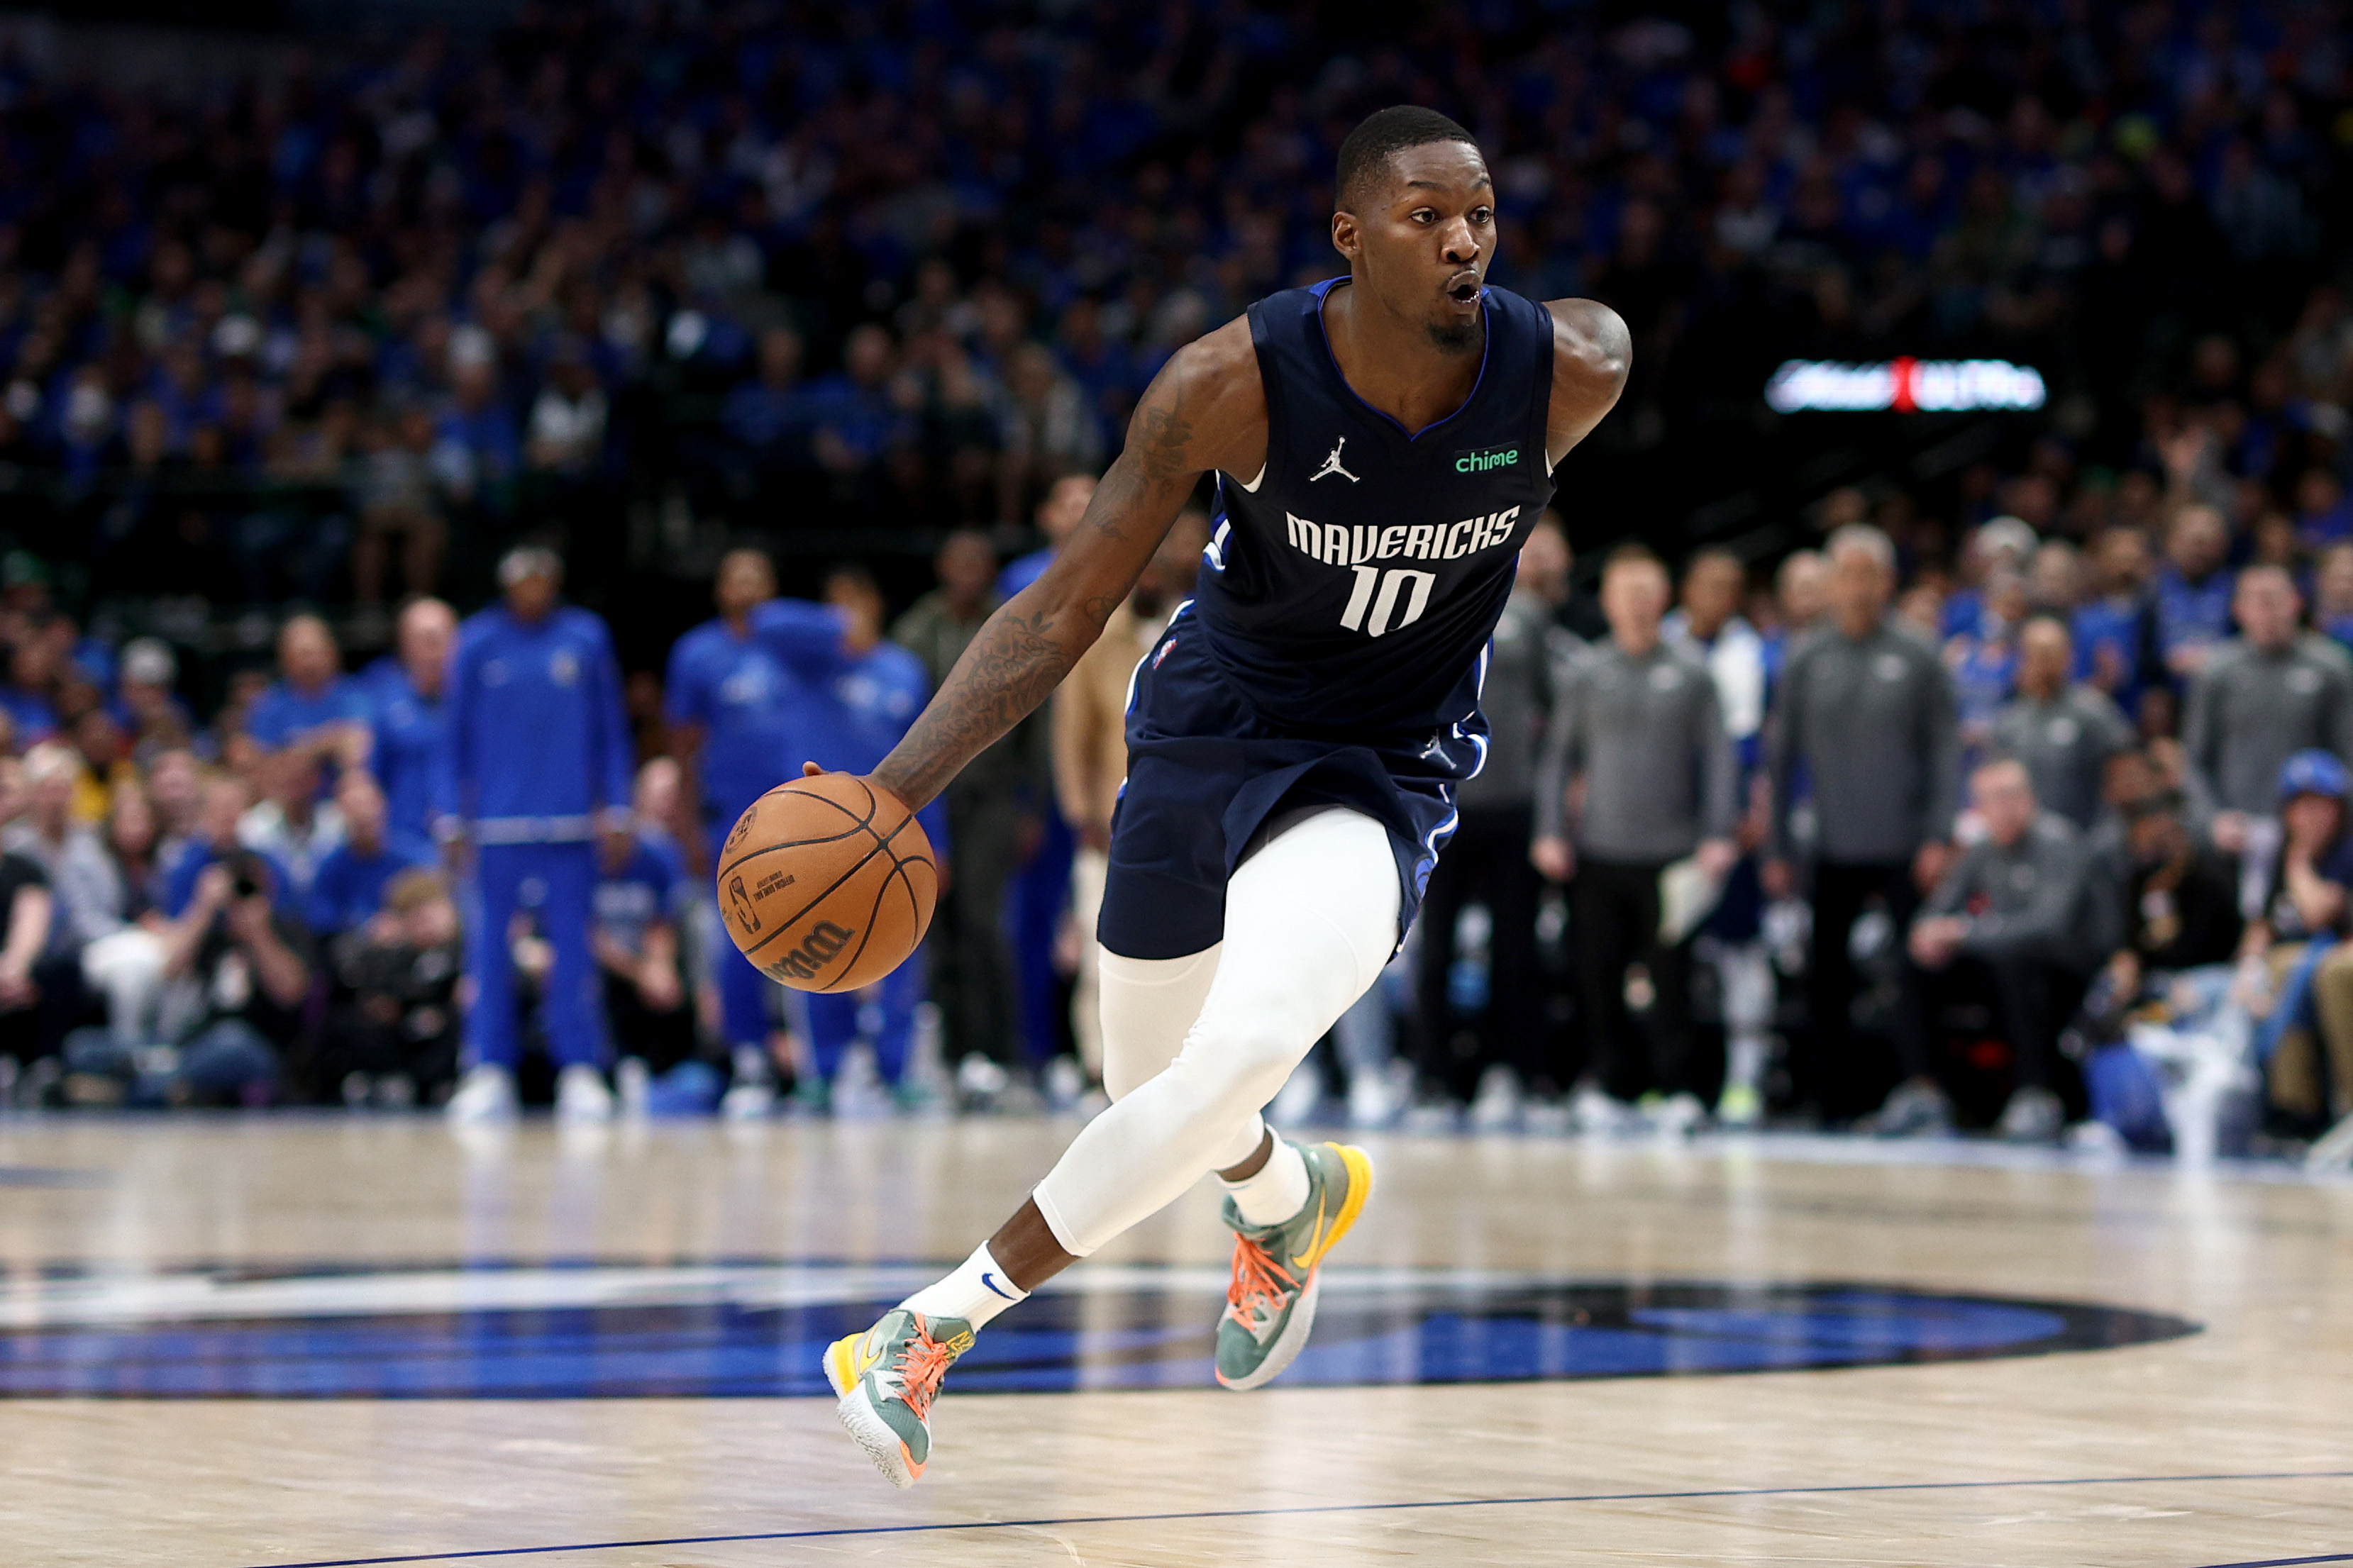 Dorian Finney-Smith is the Mavs' ace role player that every NBA team needs  